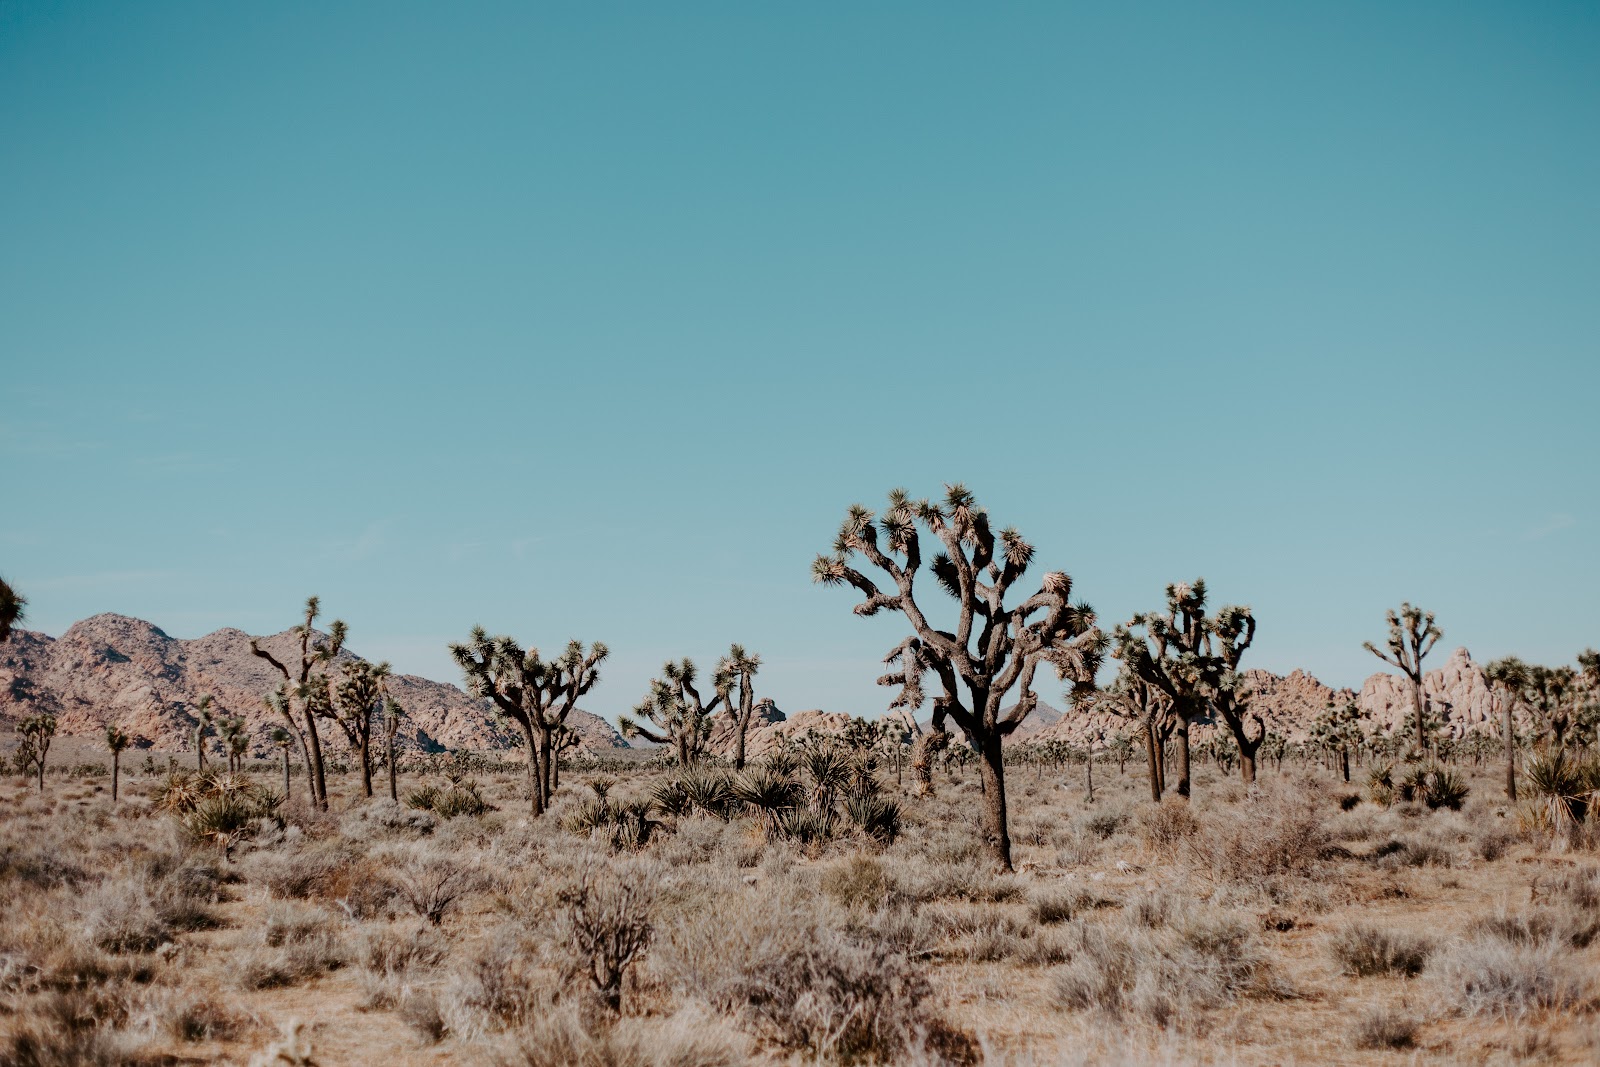 Joshua Tree NP Is a great weekend trip from San Diego